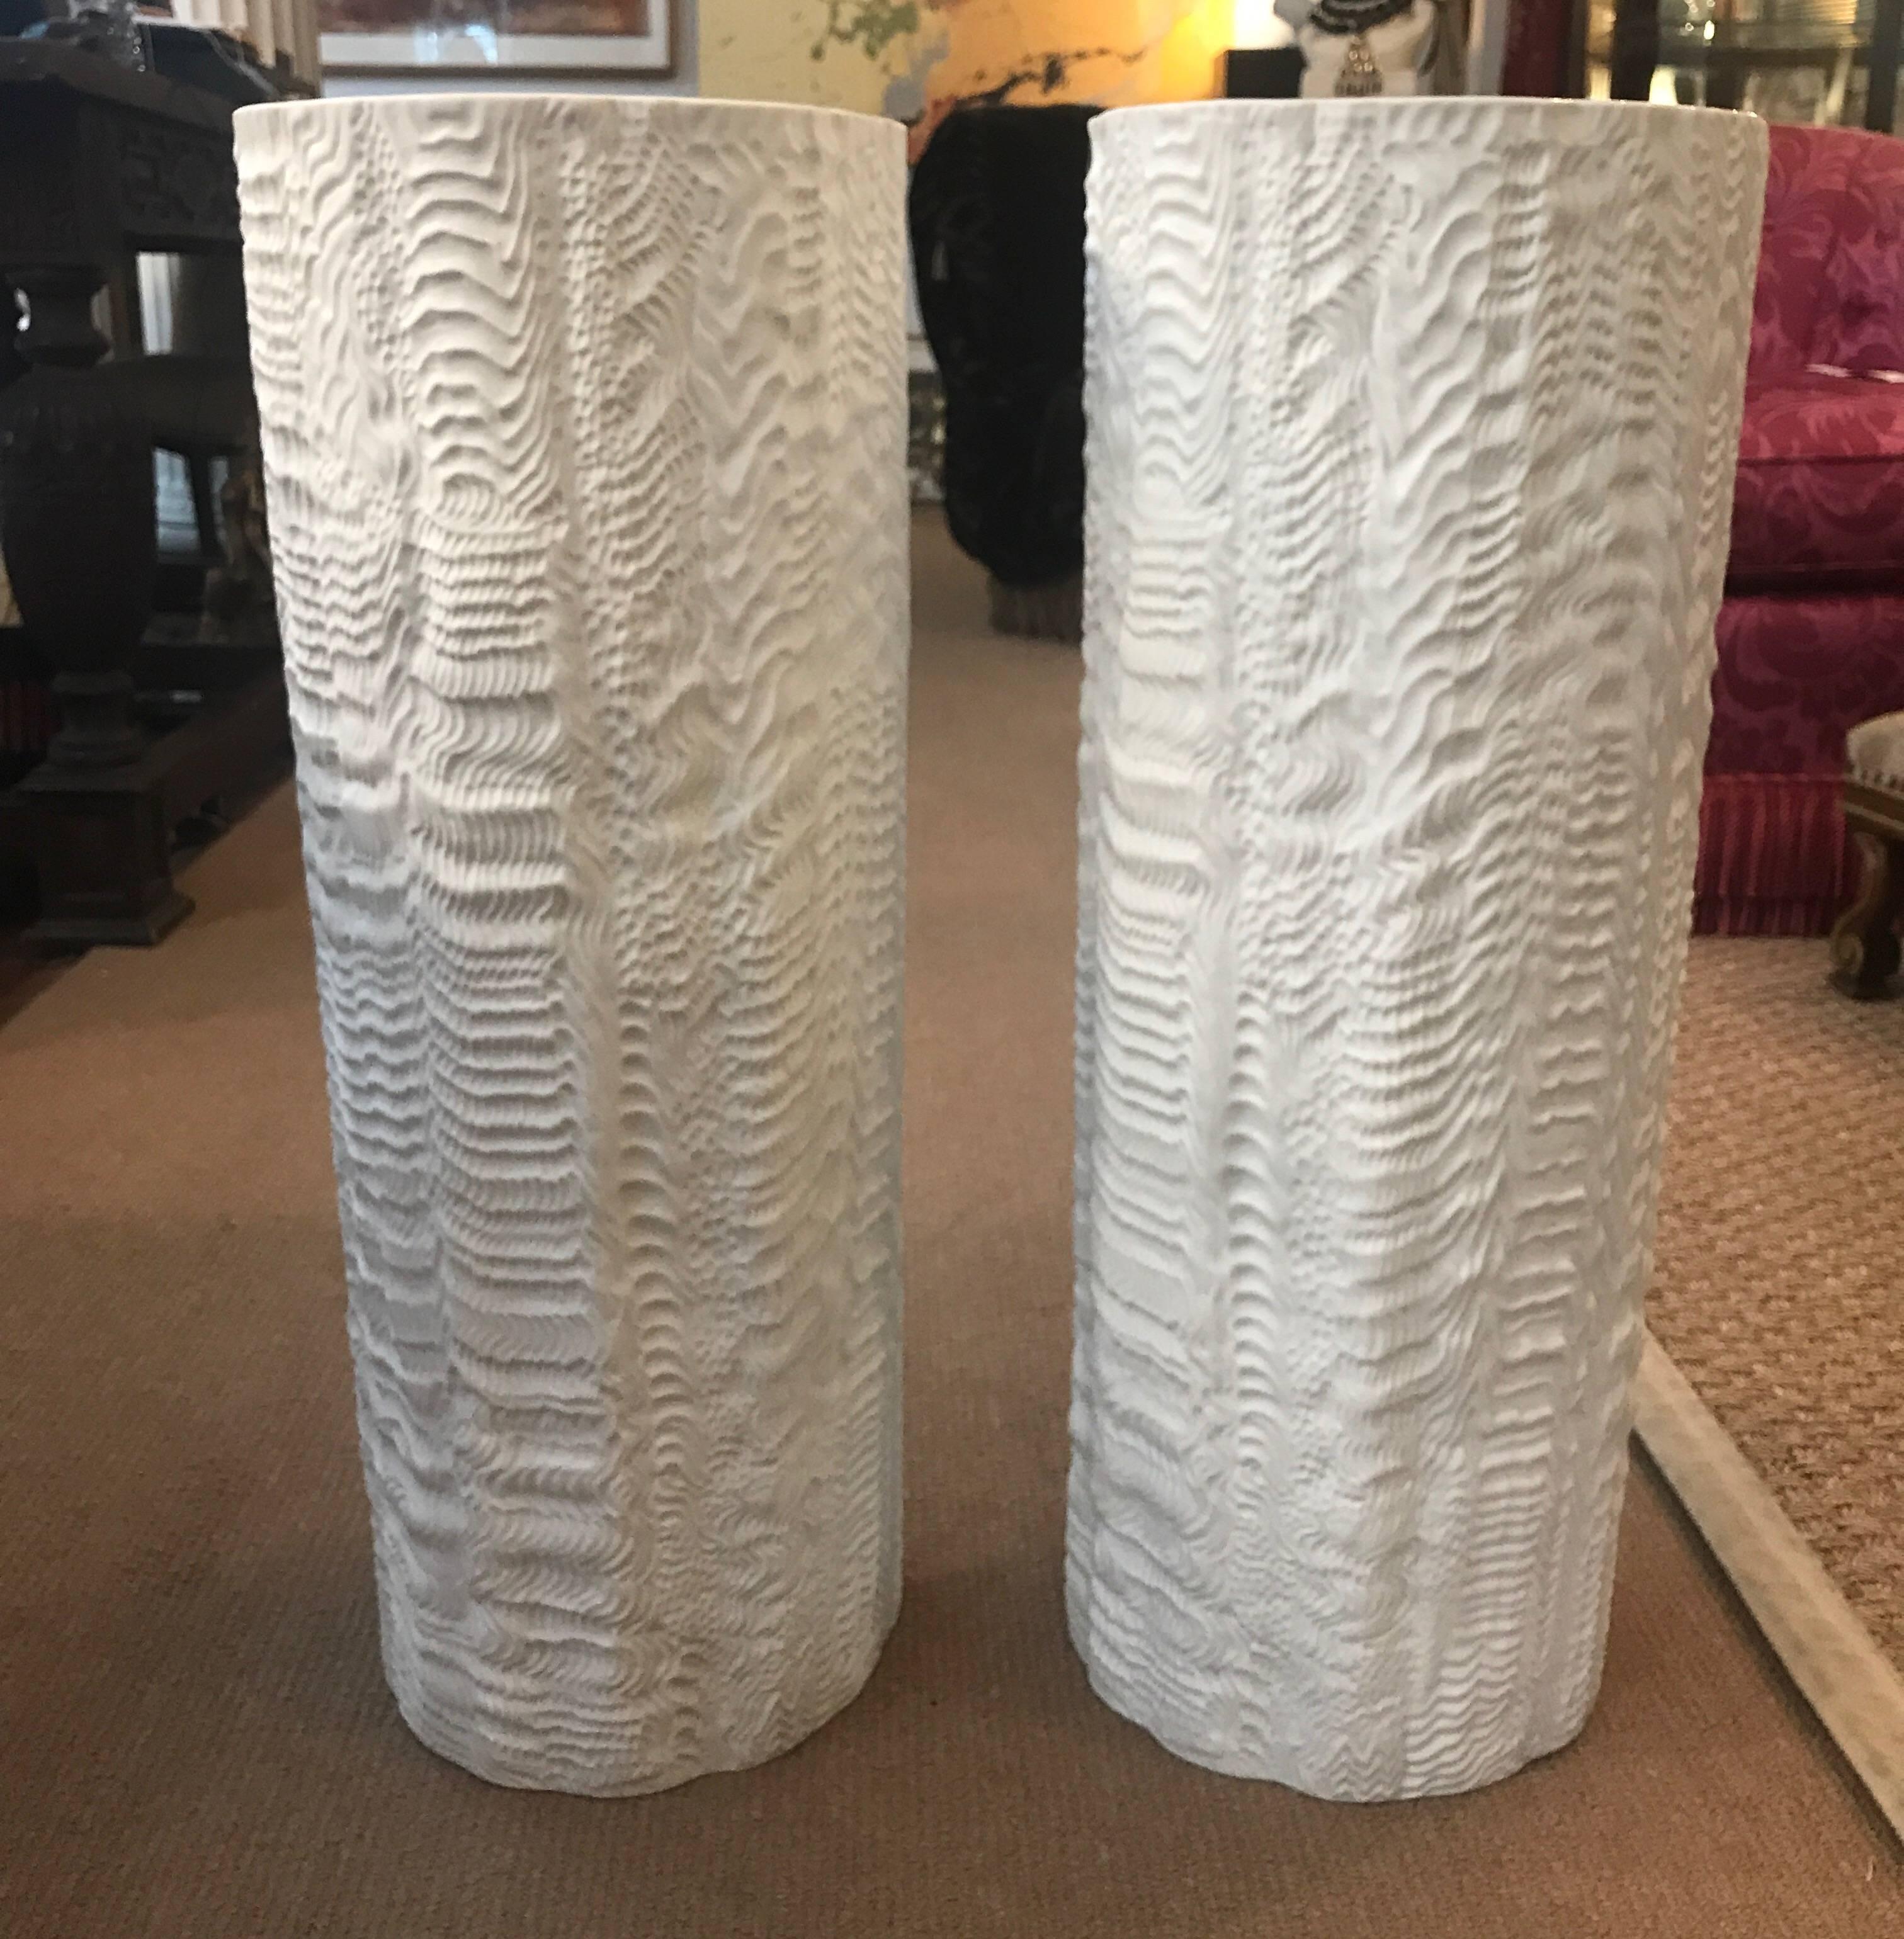 A pair of porcelain bisque white umbrella stands designed by Martin Freyer (1909-1974) for Rosenthal. The unusual organic texture in a cylindrical shape. These are a great option to use a a pair of lave vases, very dramatic.

From 1964-1974 Martin